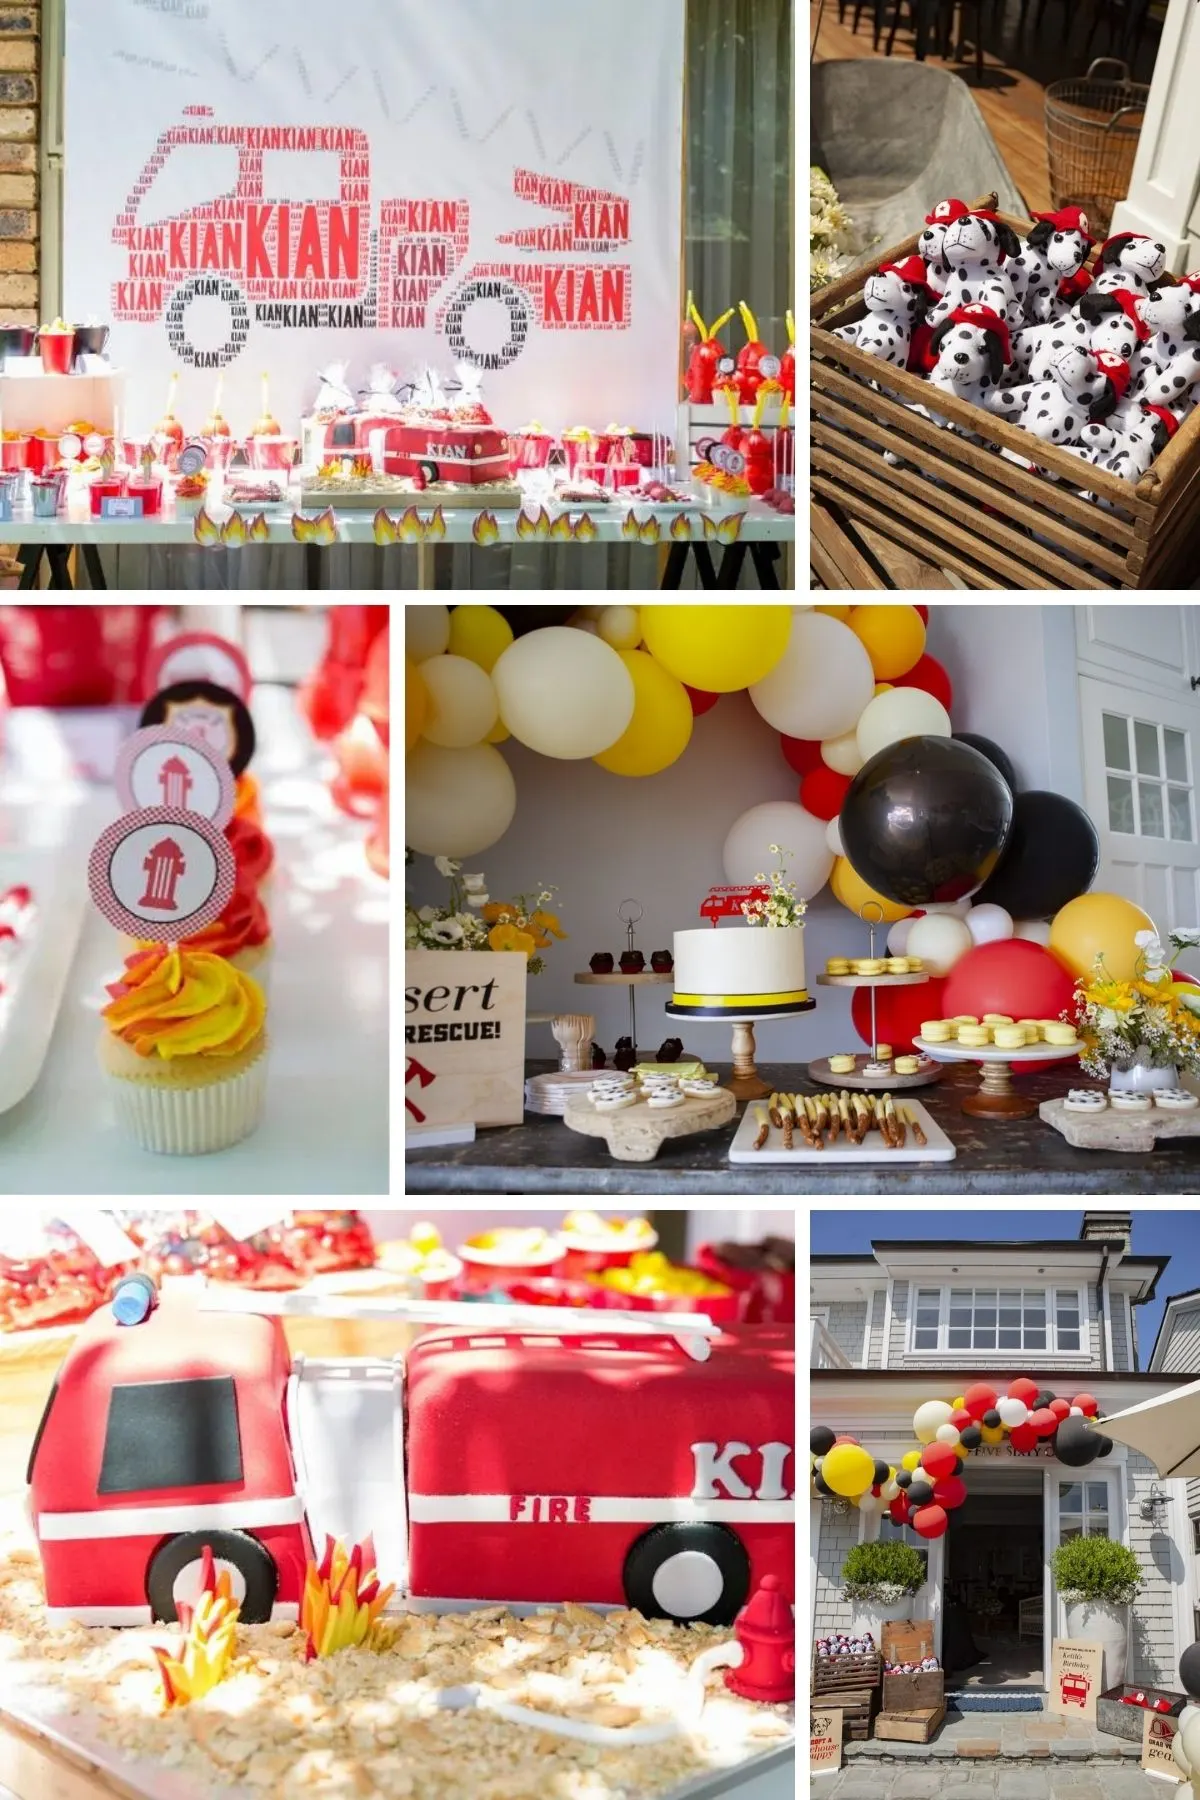 Photo collage for sound the alarm party theme including cakes, treats, and balloons.